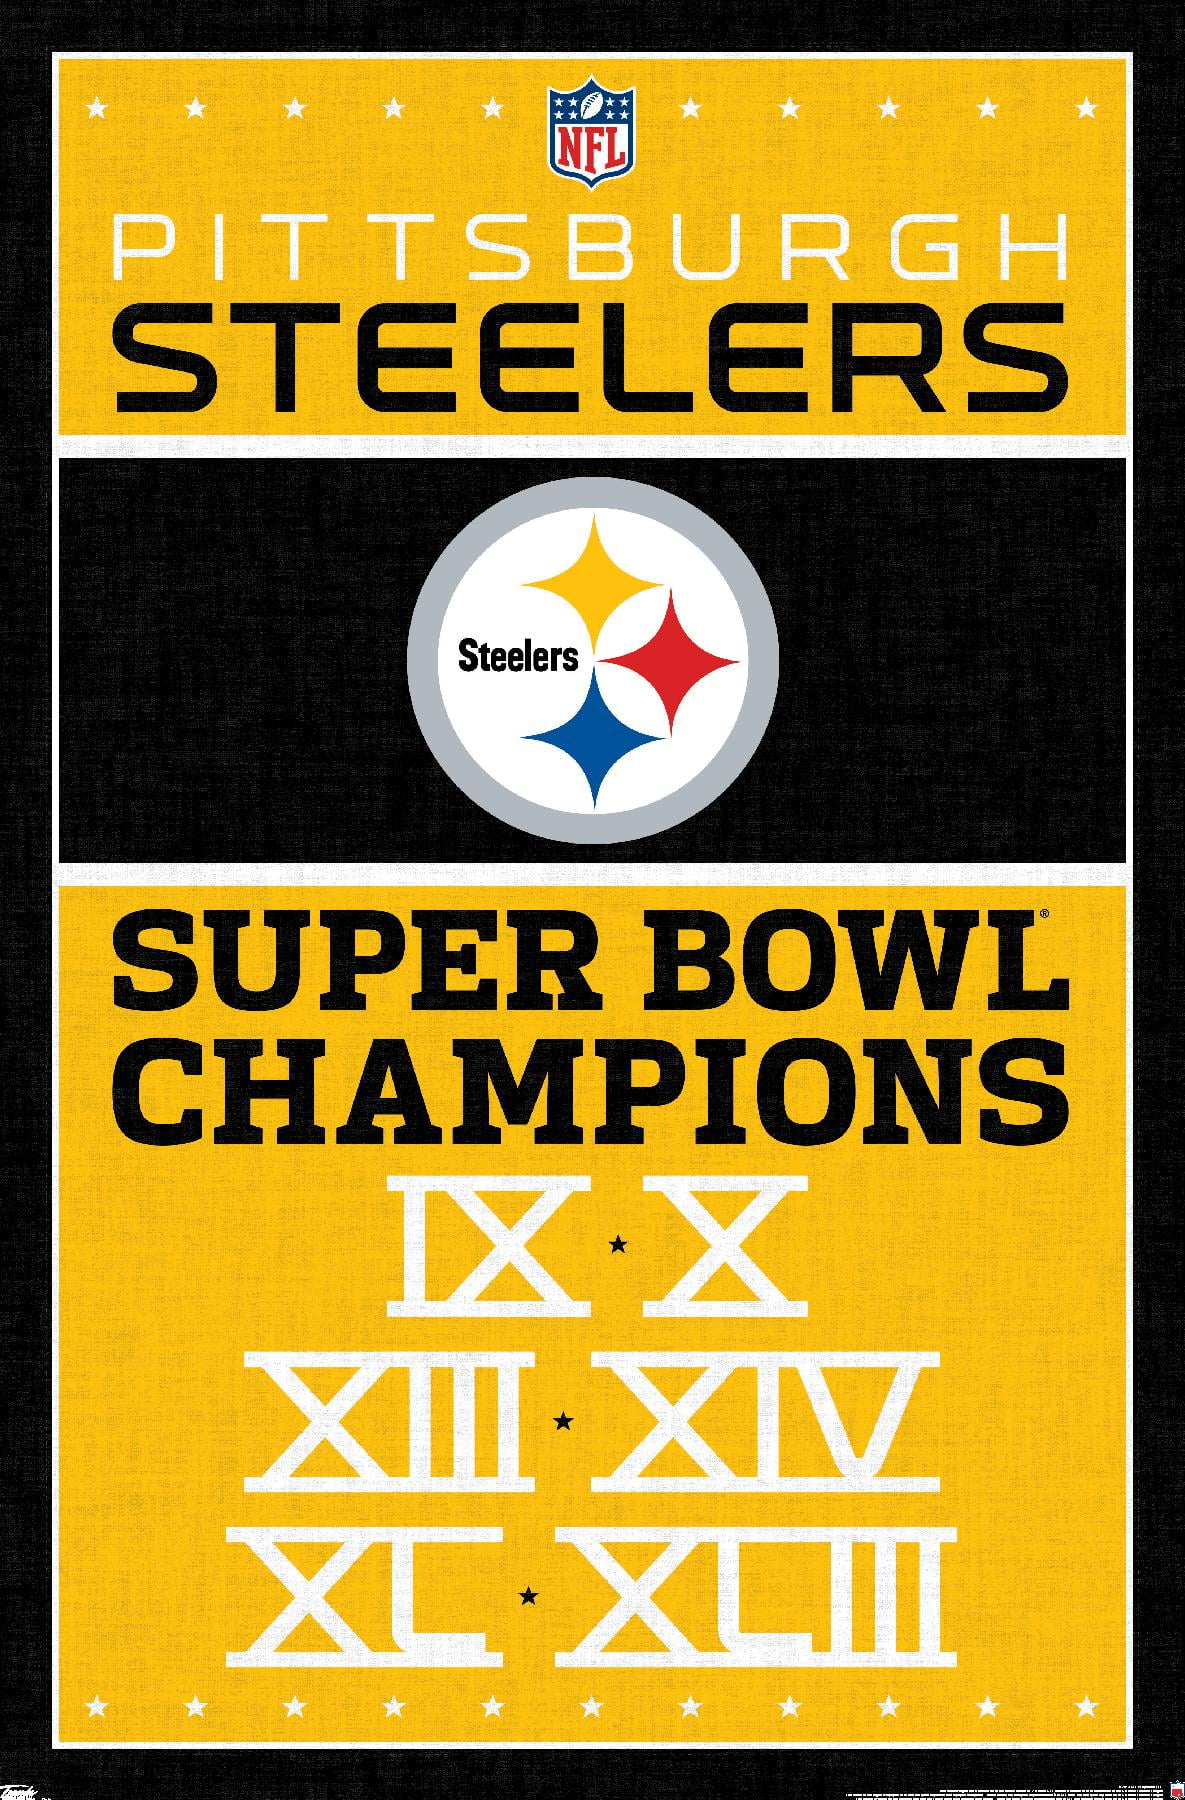 NFL Pittsburgh Steelers - Champions 13 Wall Poster, 22.375' x 34'